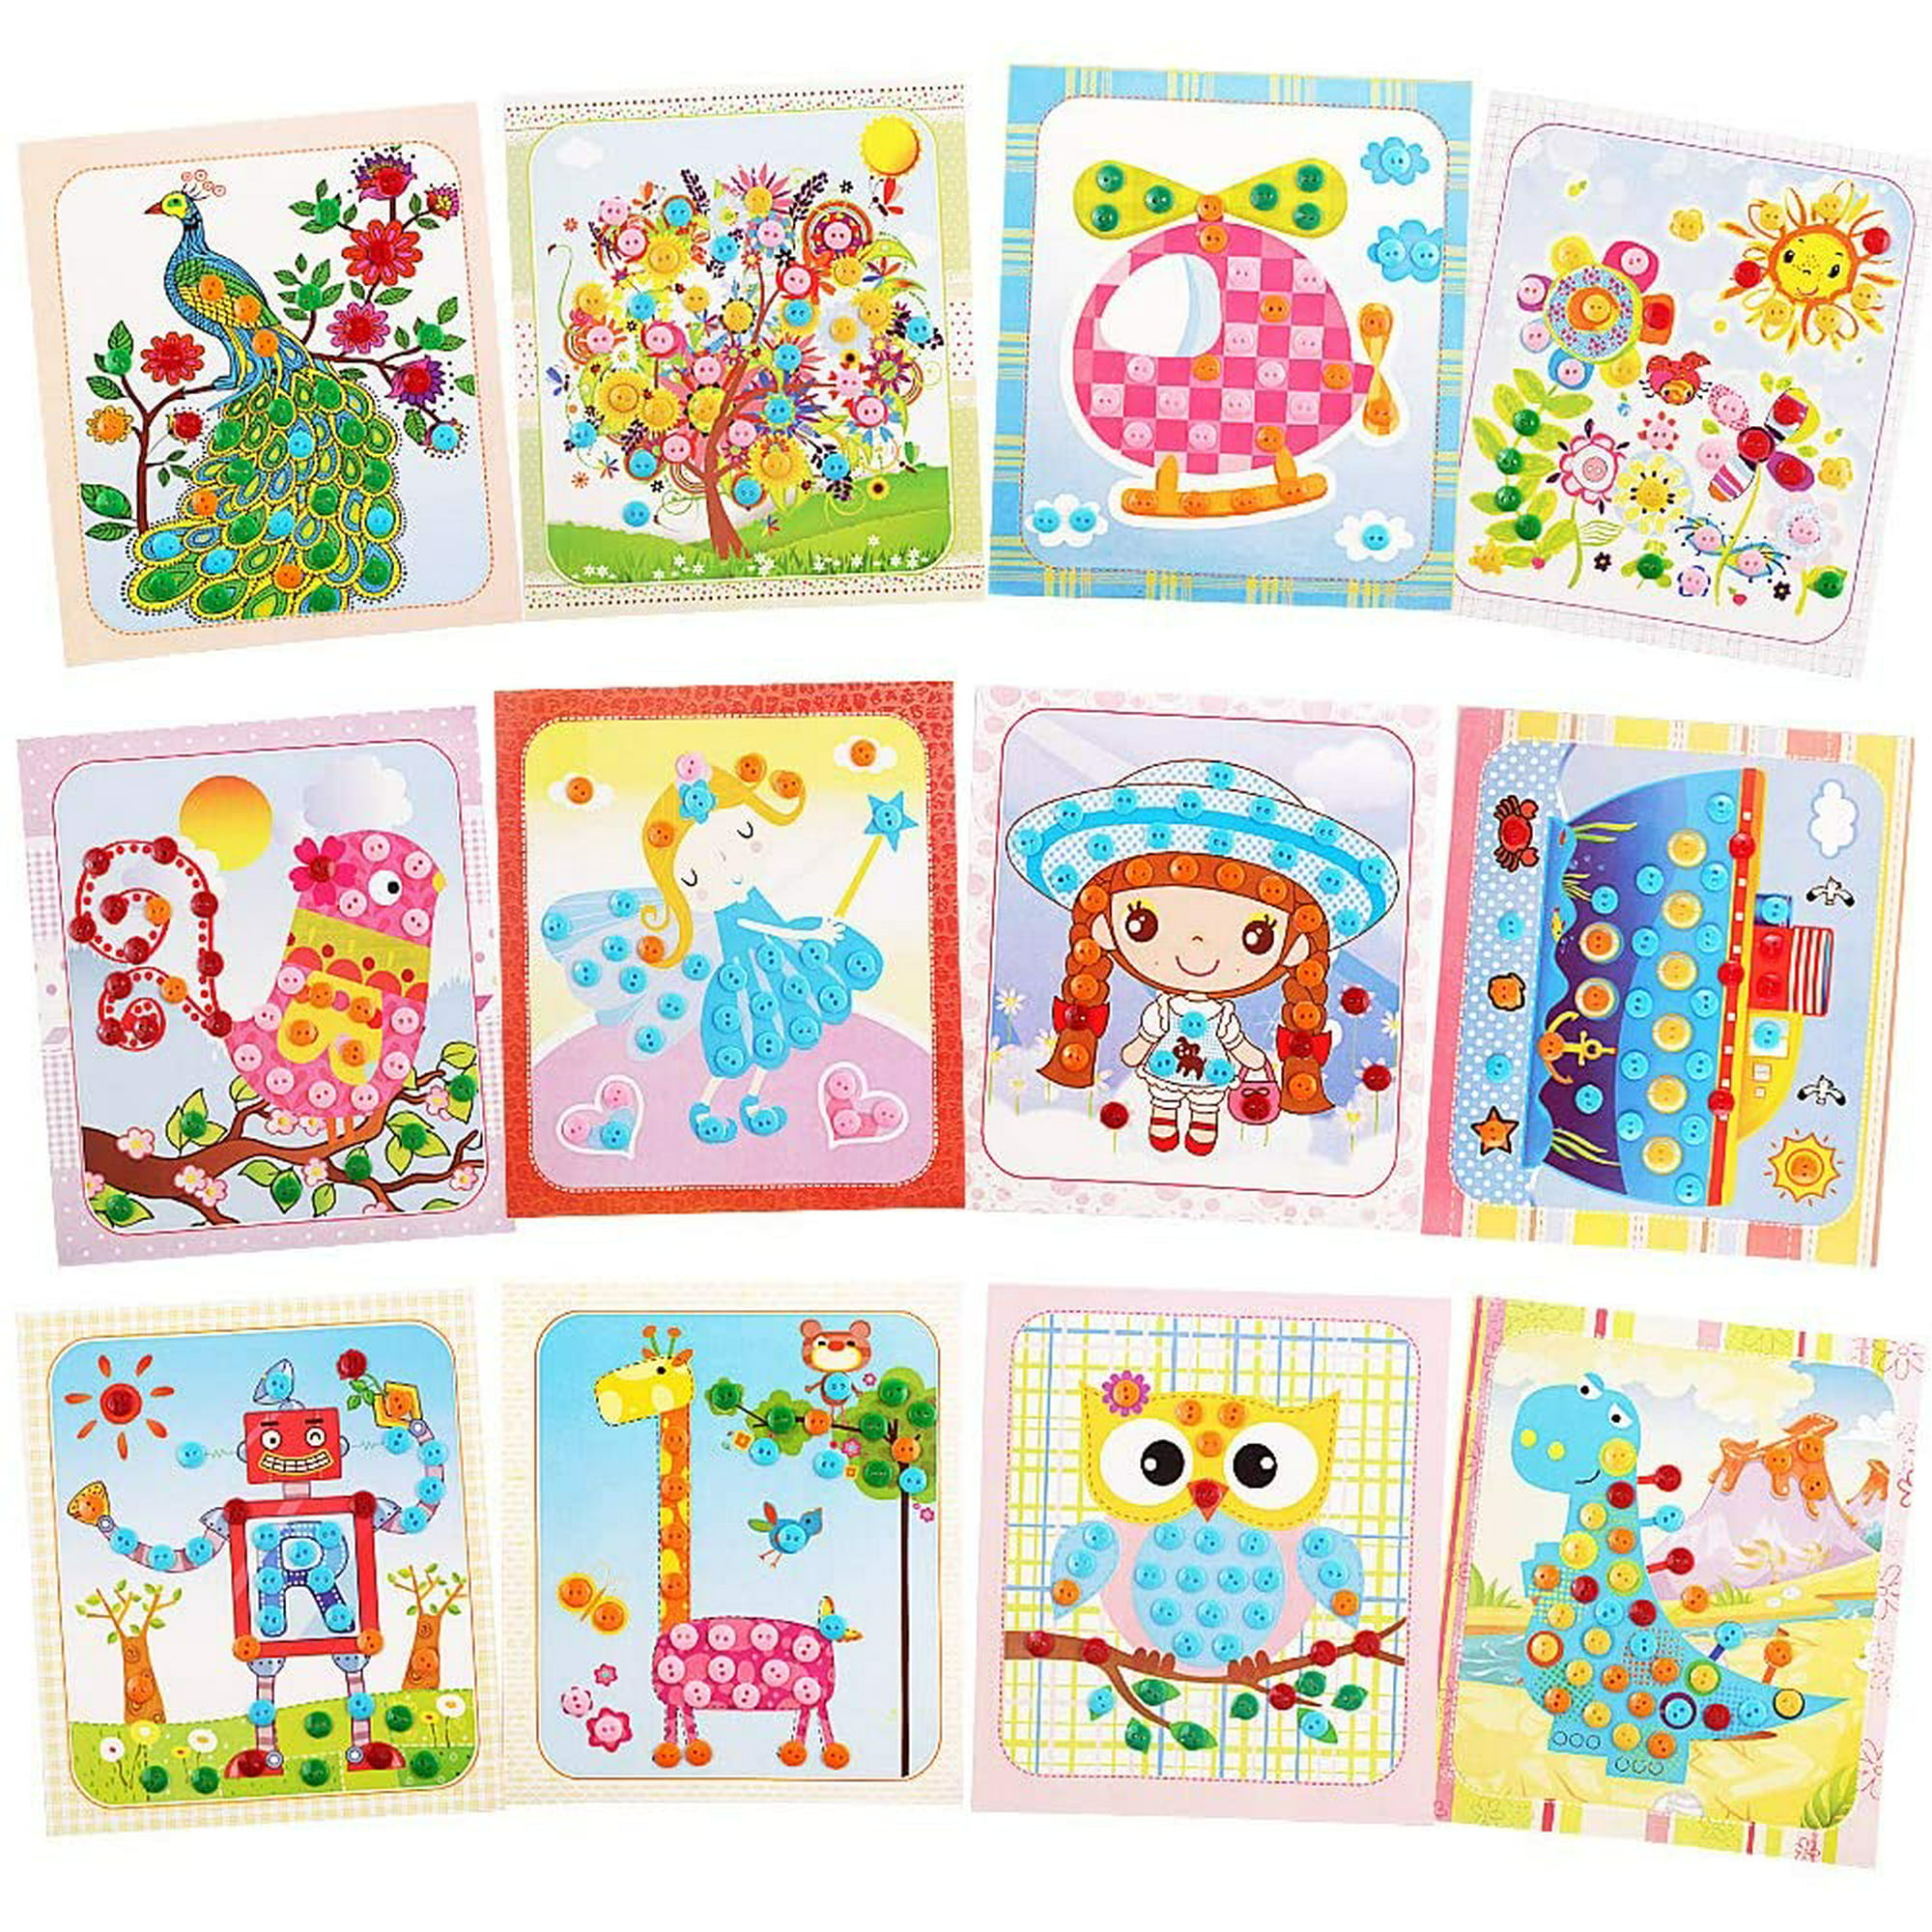 5 Pcs Colorful Sticky Mosaic EVA Windmill Art Kits for Kids 1 2 3 4 5 Years  Old, DIY Mosaic Art Crafts Early Learning Games Handmade Art Kit for  Preschool Toddlers Boys